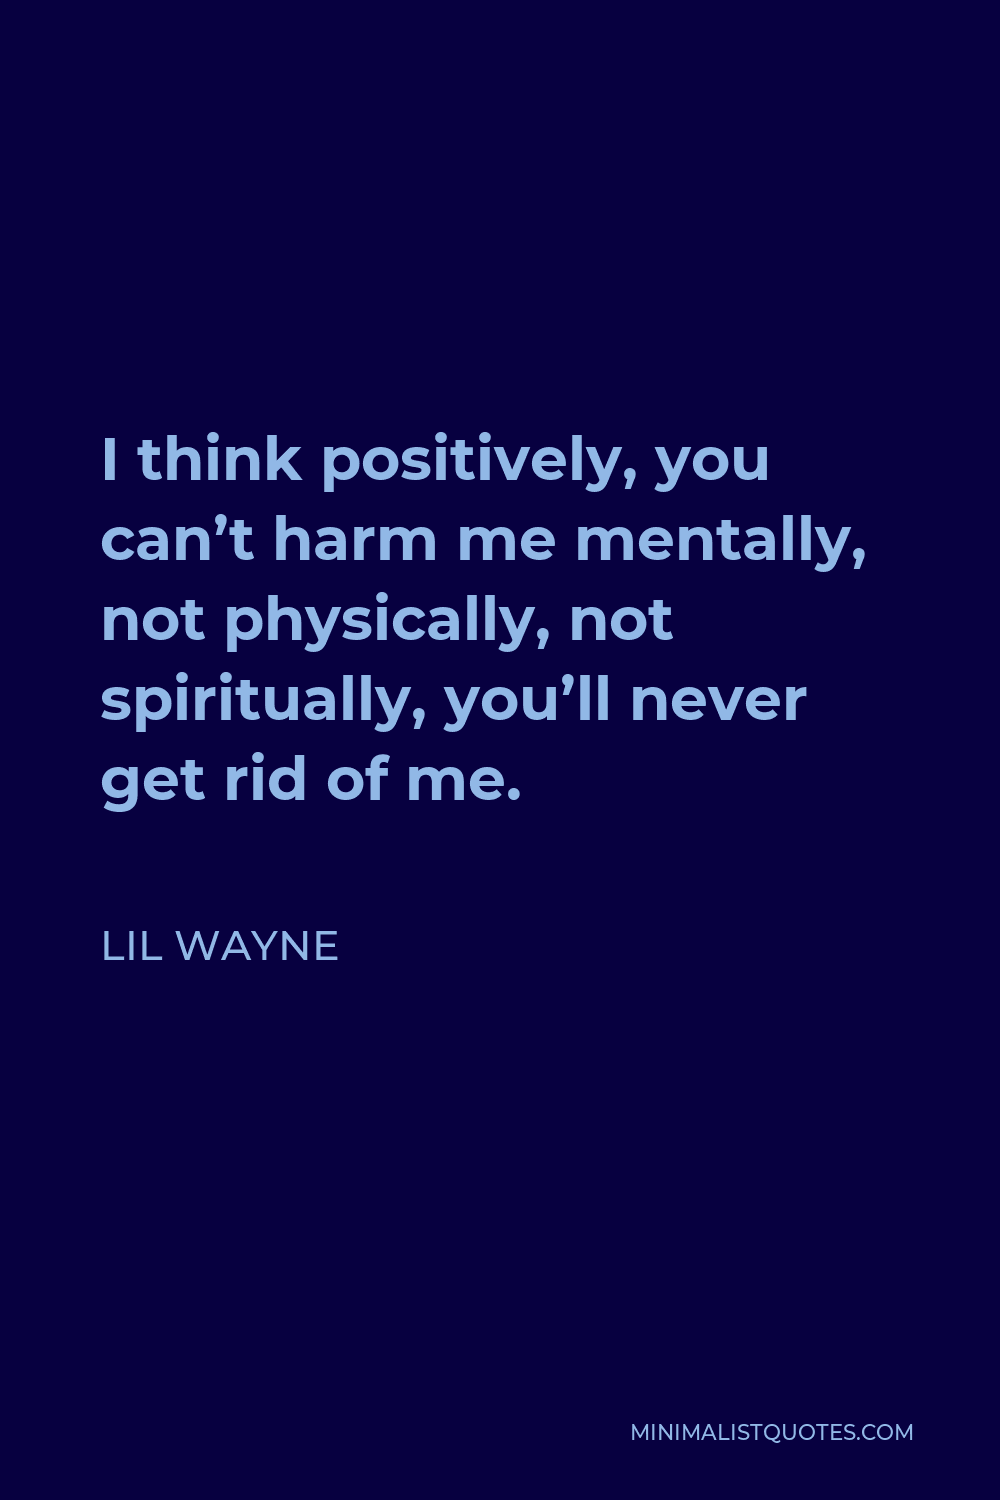 Lil Wayne Quote - I think positively, you can’t harm me mentally, not physically, not spiritually, you’ll never get rid of me.